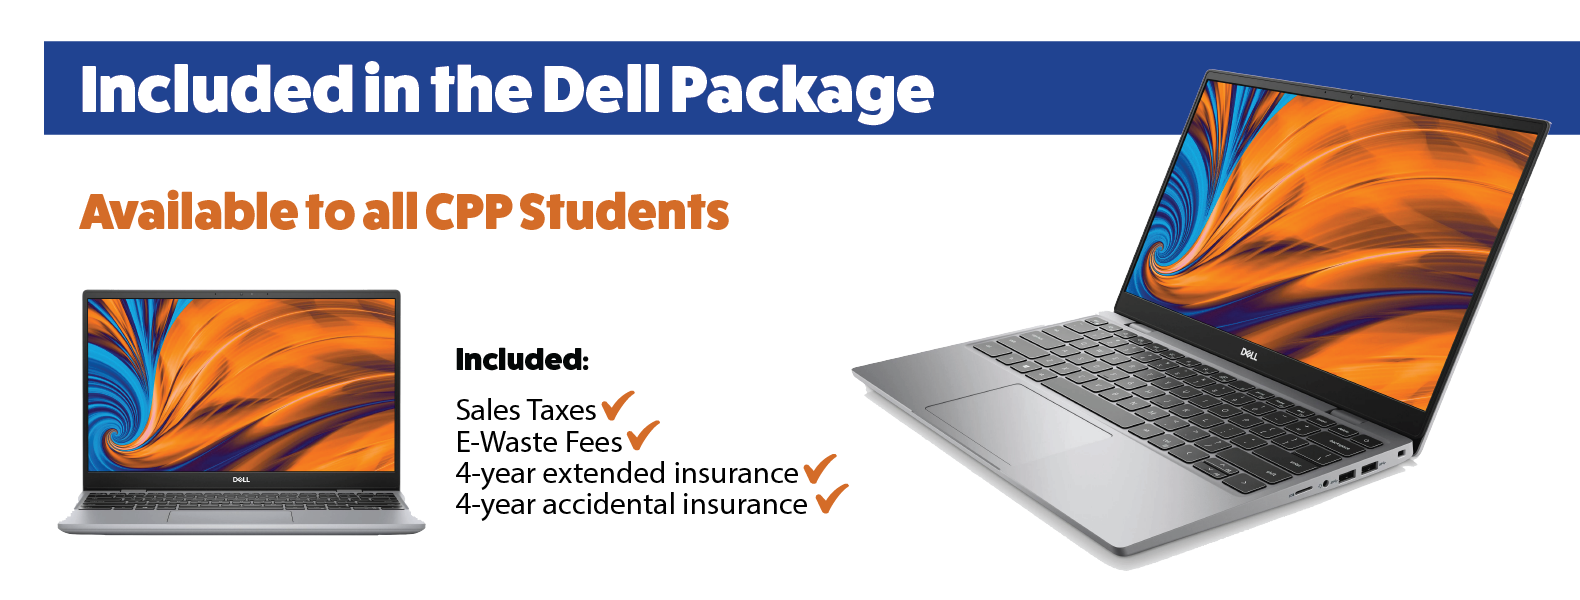 Included in the Dell Package. Available to all CPP Students: Sales Taxes, E-Waste Fees, 4-year extended insurance, 4-year accidental insurance  